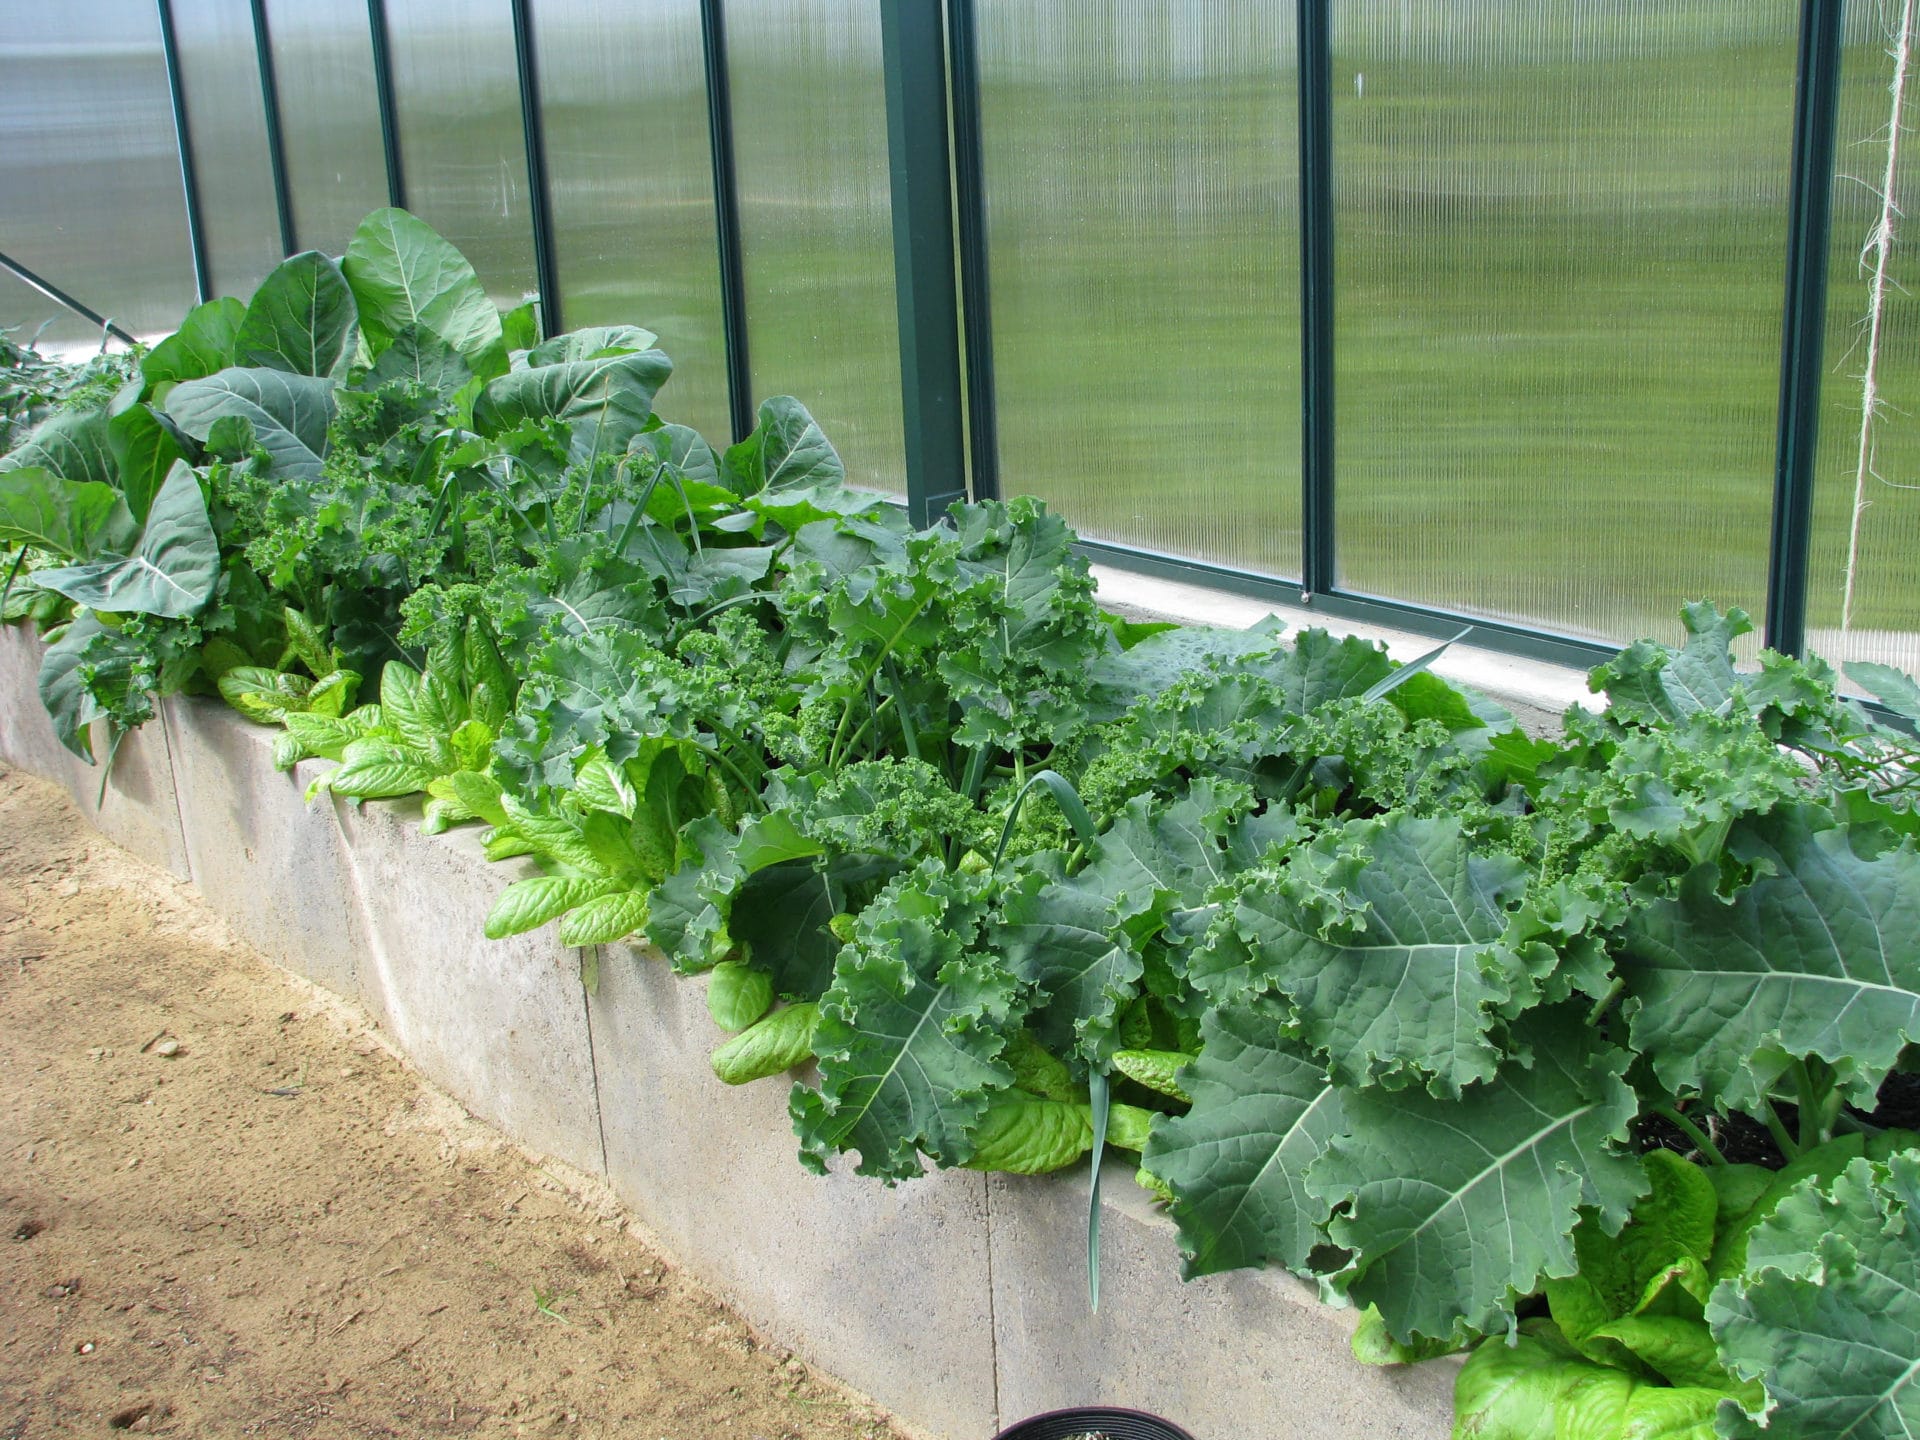 Kale and other greenhouse green vegetables